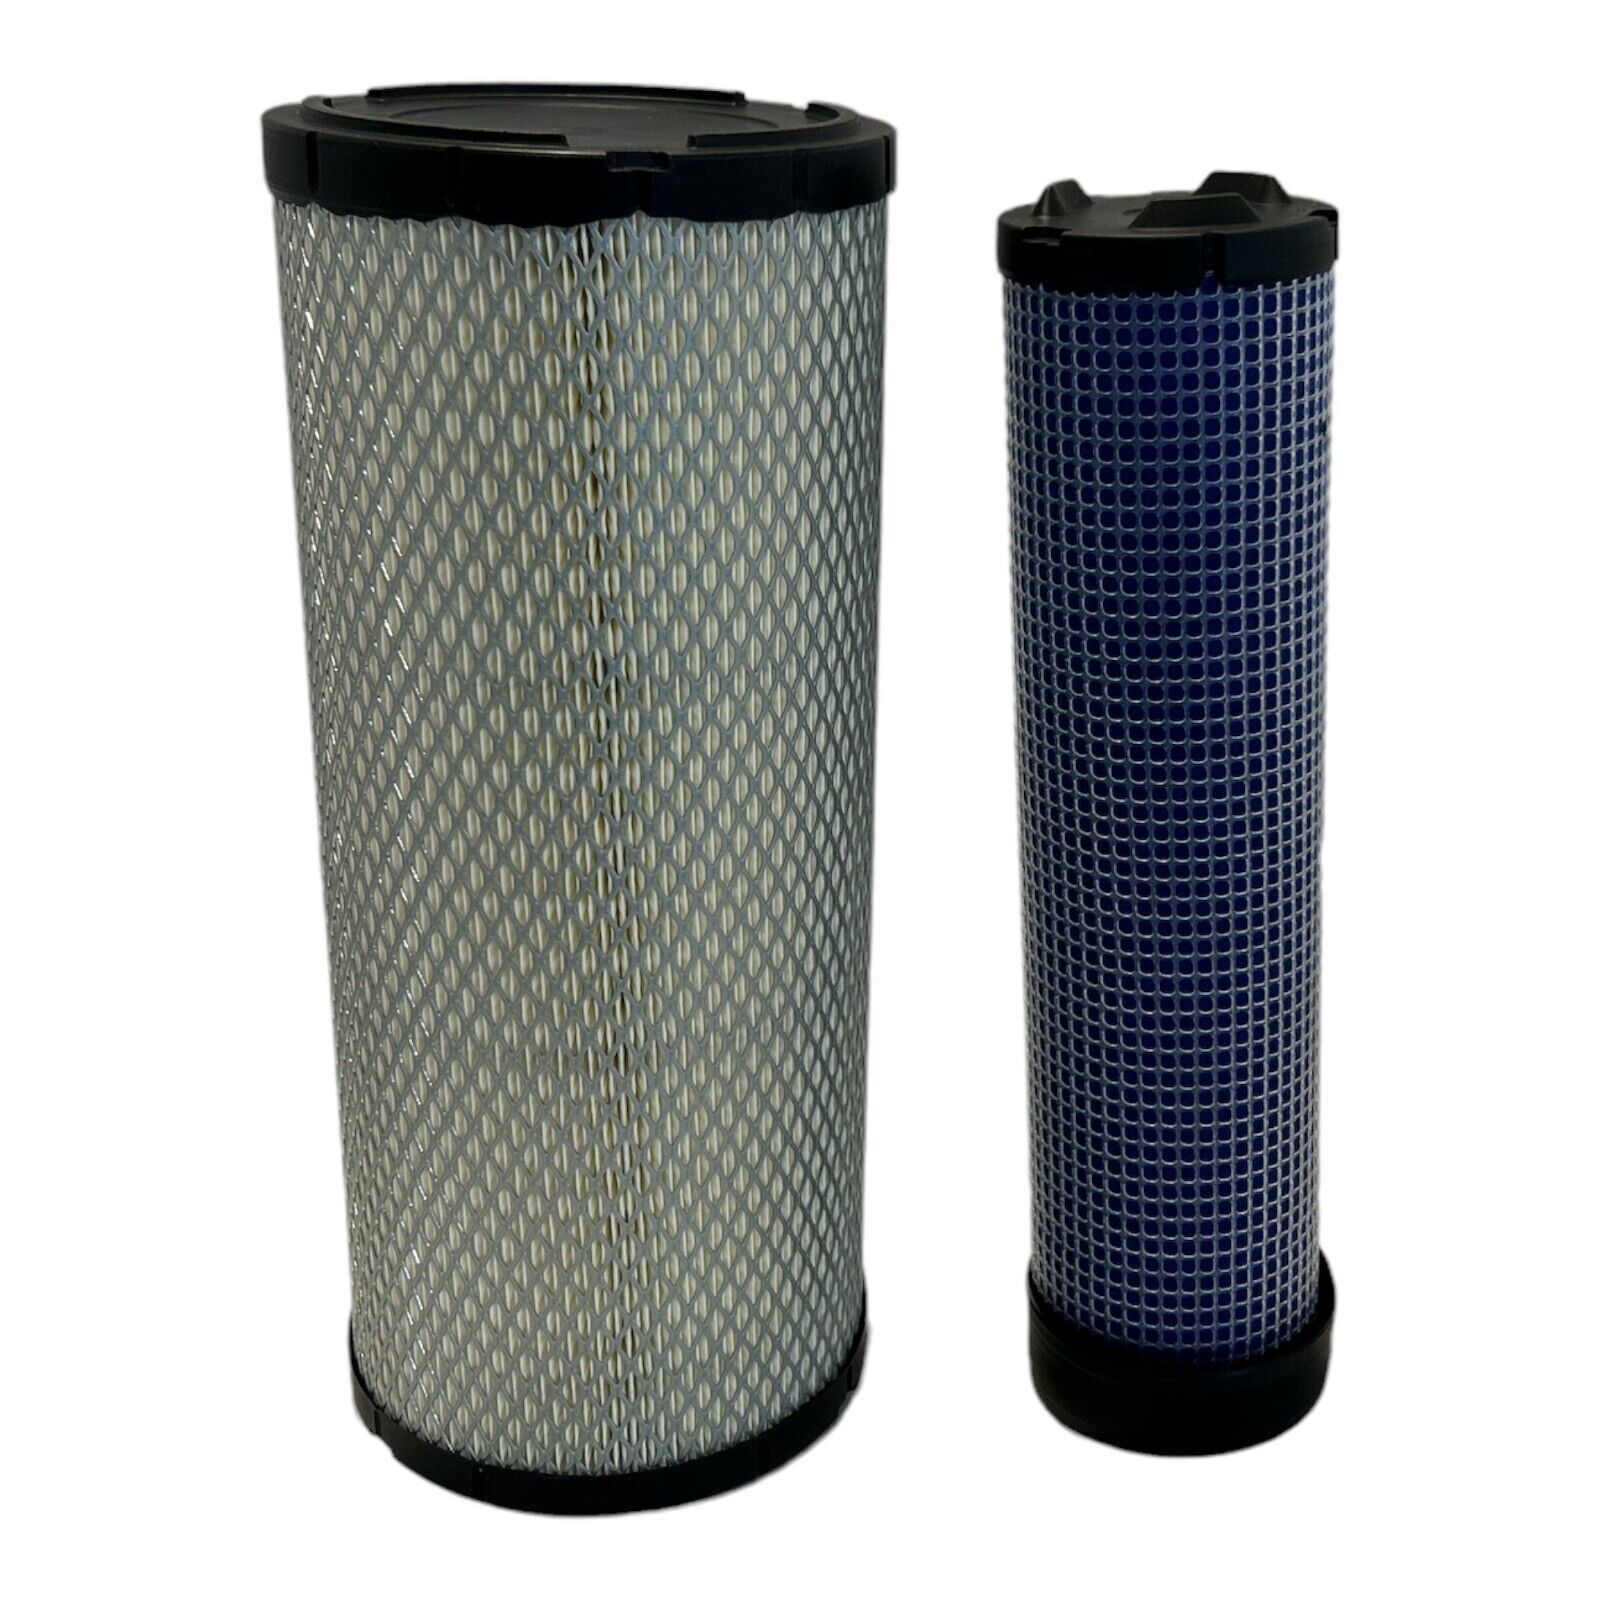 6666375 6666376 Air Filter For Bobcat 863 864 873 883 S450 S530 S570 S590 A300